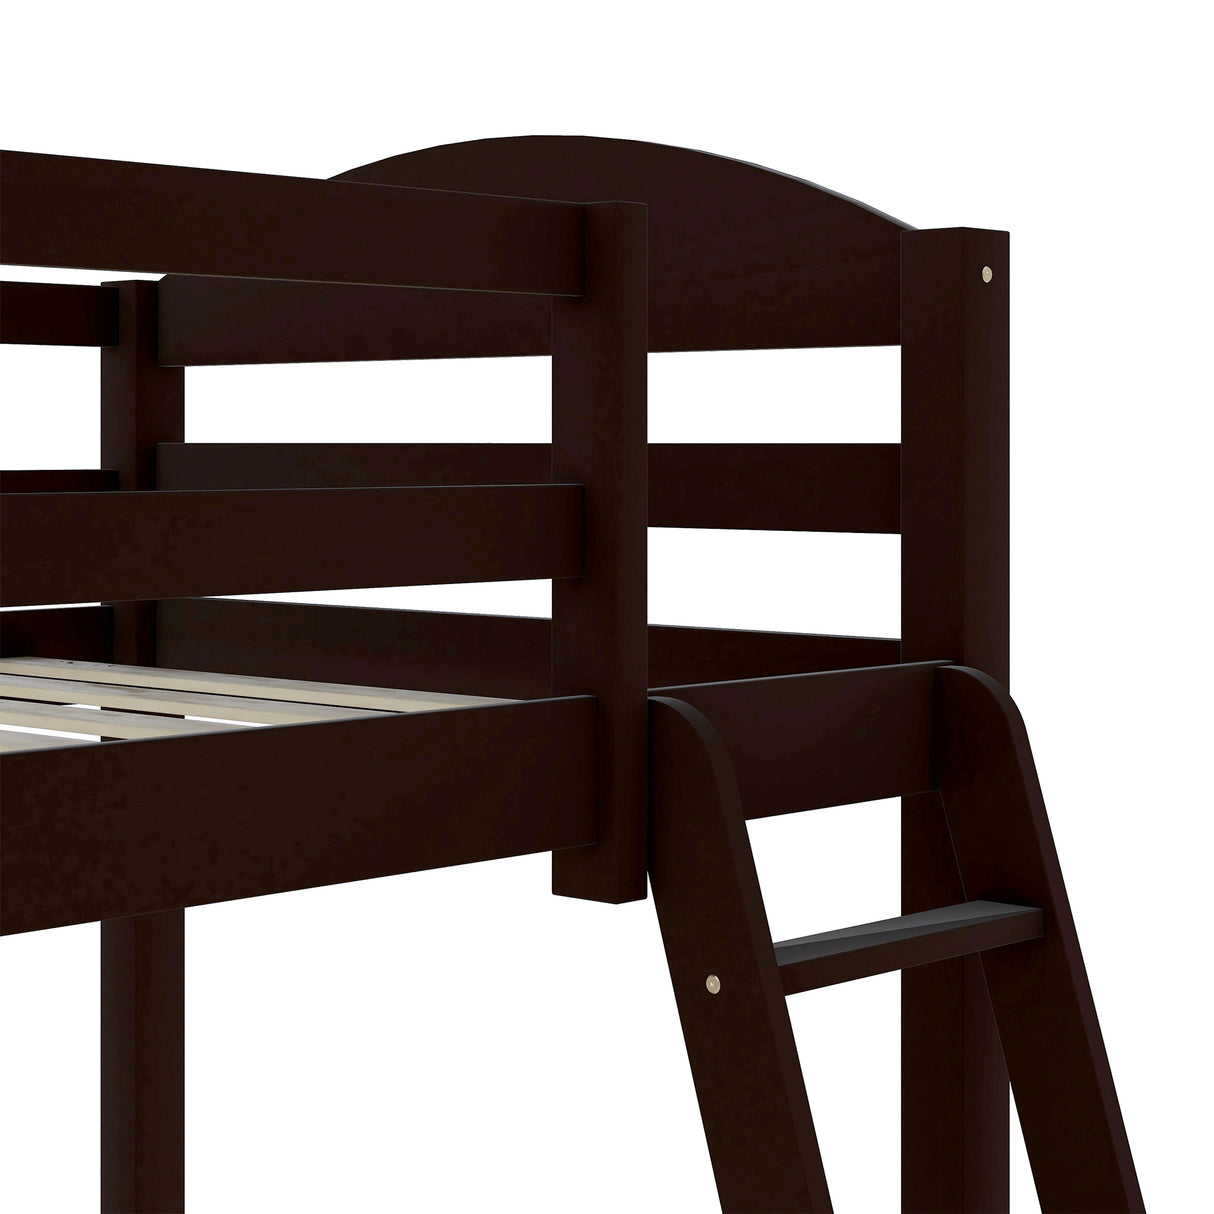 Twin L-Shaped Bunk Bed and Loft Bed - Espresso(OLD SKU :LP000023AAP) - Home Elegance USA